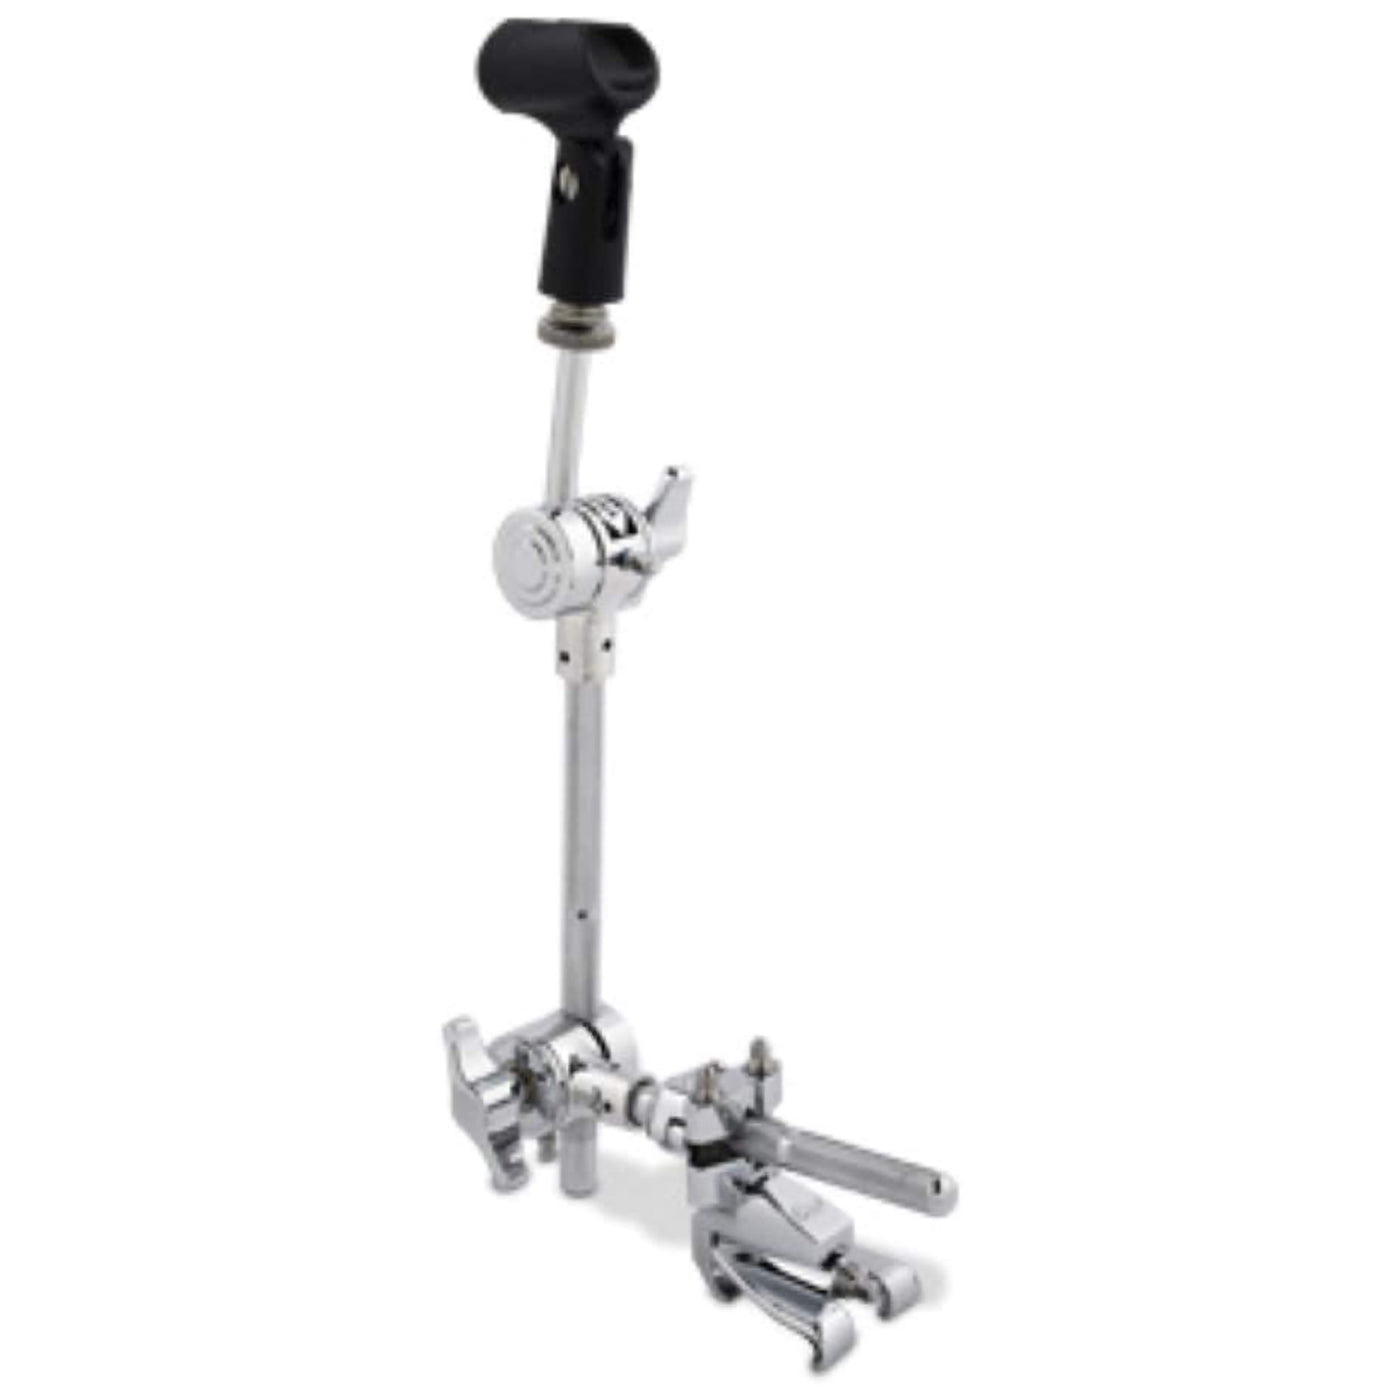 DW Claw Hook Clamp Mic Arm